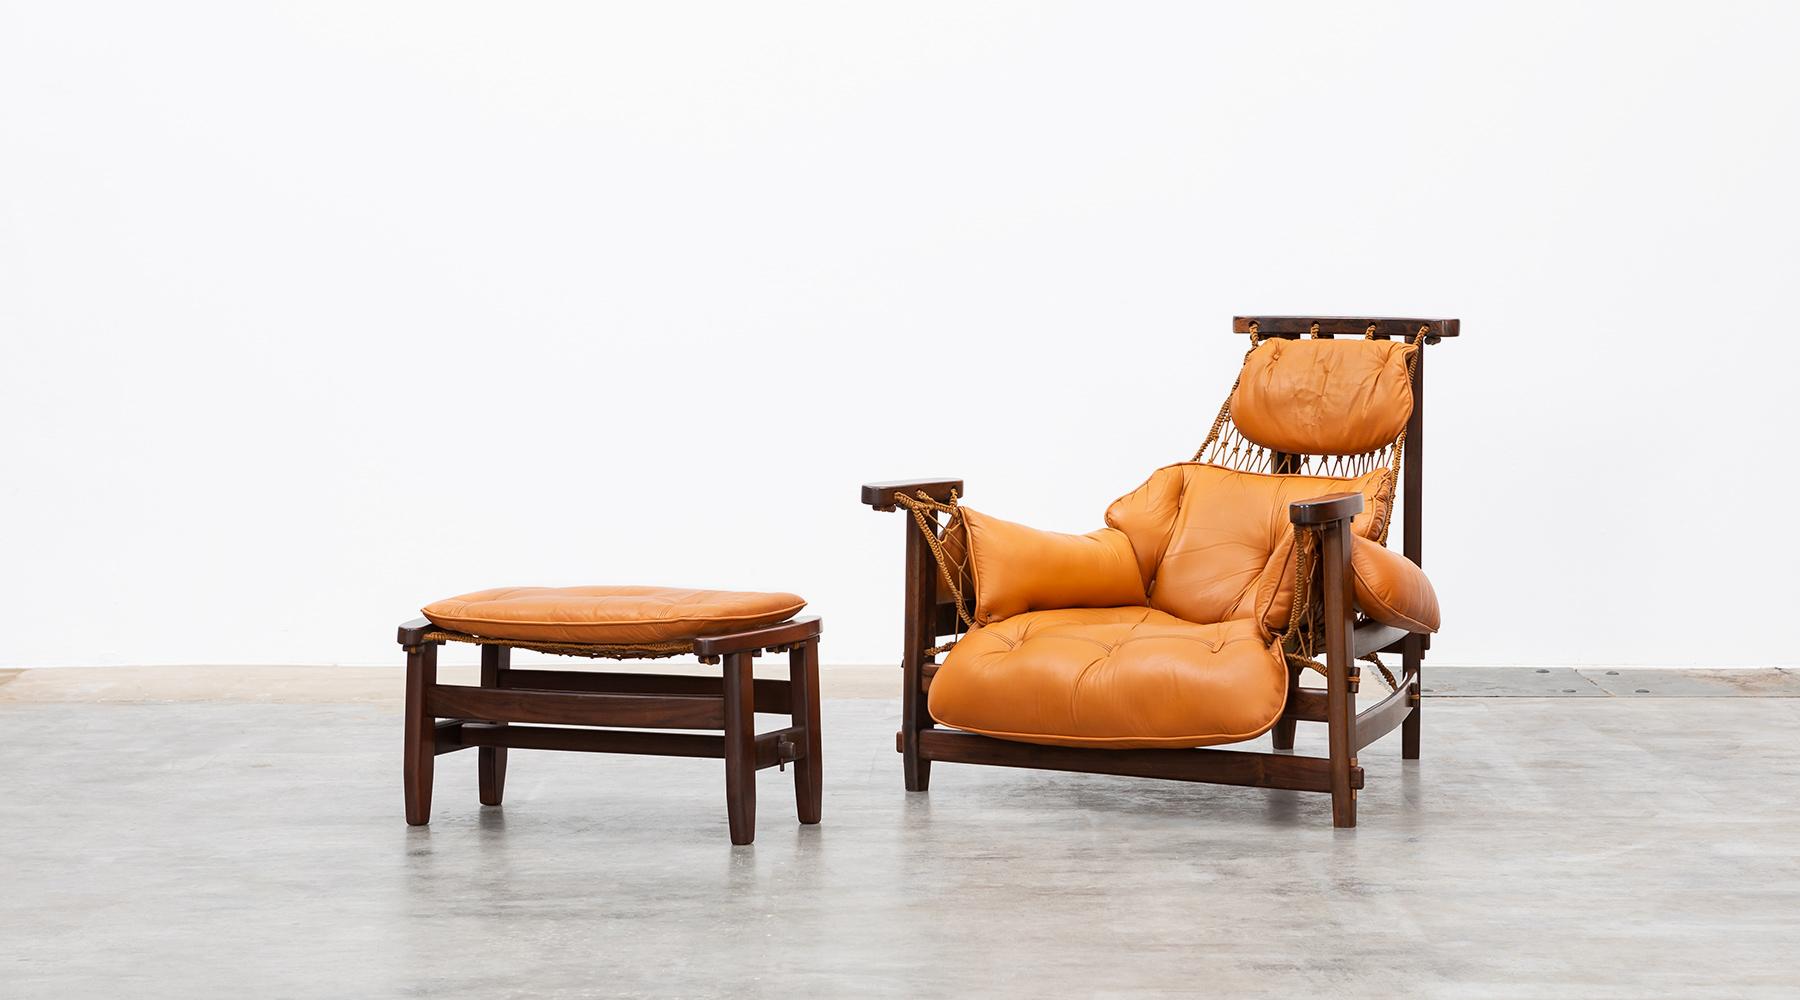 Captain´s chair, wood, leather, lounge chair with ottoman by Jean Gillon, Brazil, 1960.

Attached to the distinctive trapezoidal base form of Brazilian wood is a fishing net-like nylon mesh that supports the leather cushions. The so-called Captain's